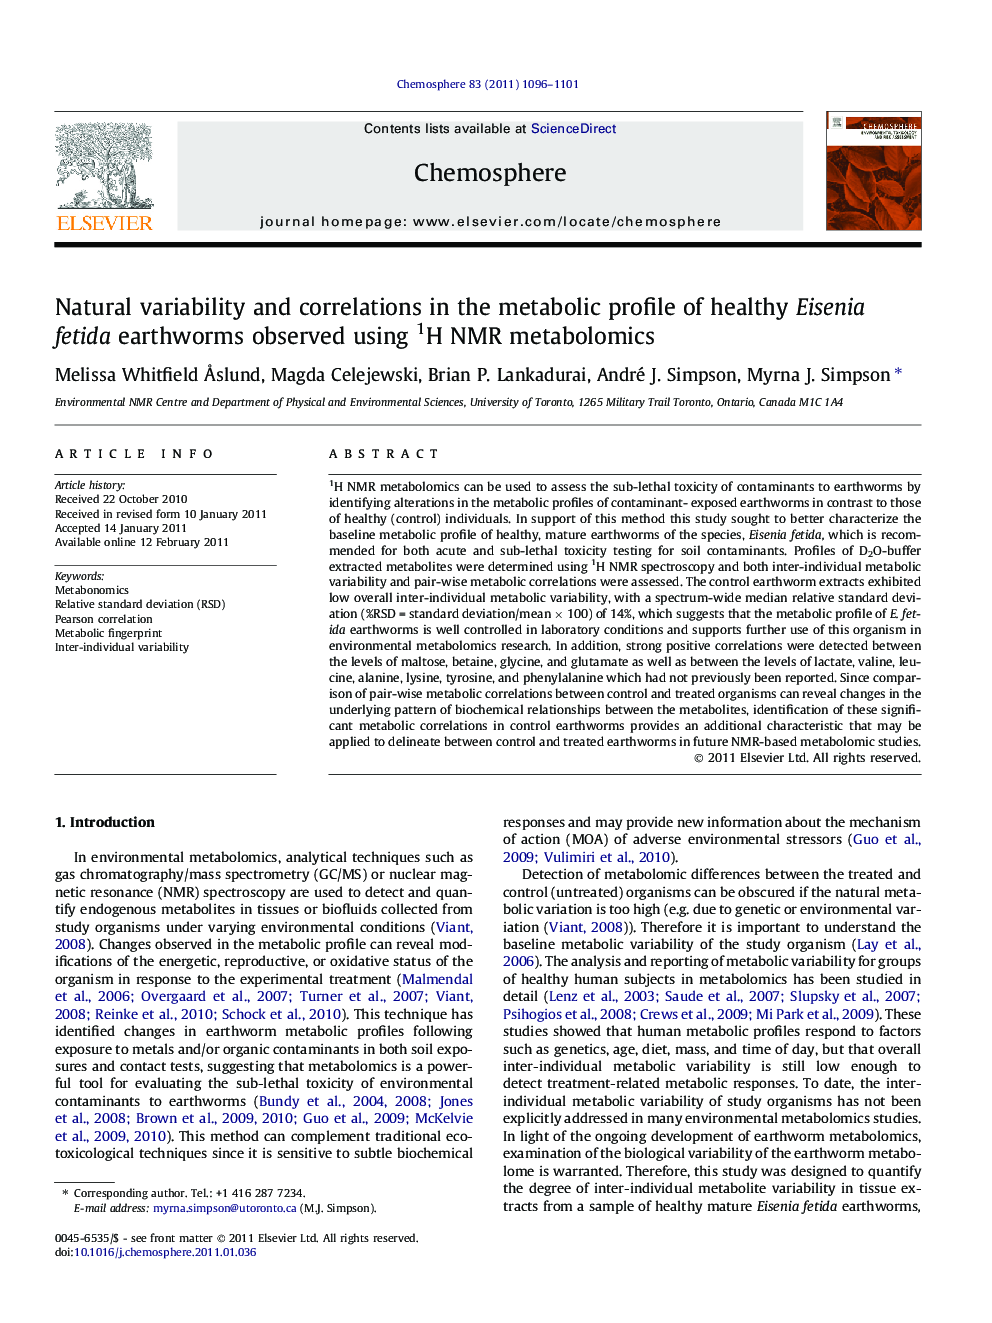 Natural variability and correlations in the metabolic profile of healthy Eisenia fetida earthworms observed using 1H NMR metabolomics